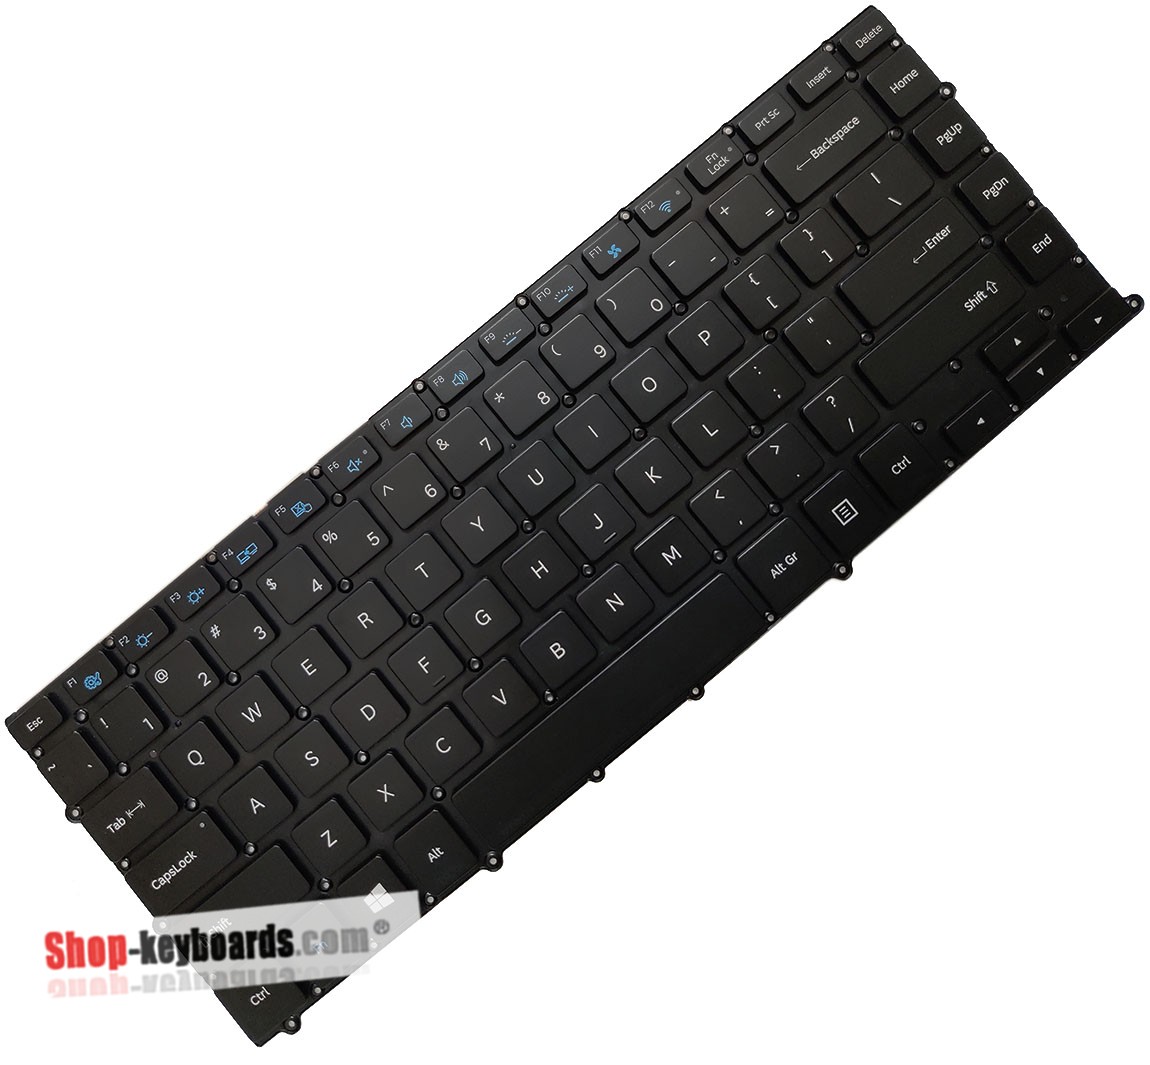 Samsung NT900X4C-A88B  Keyboard replacement